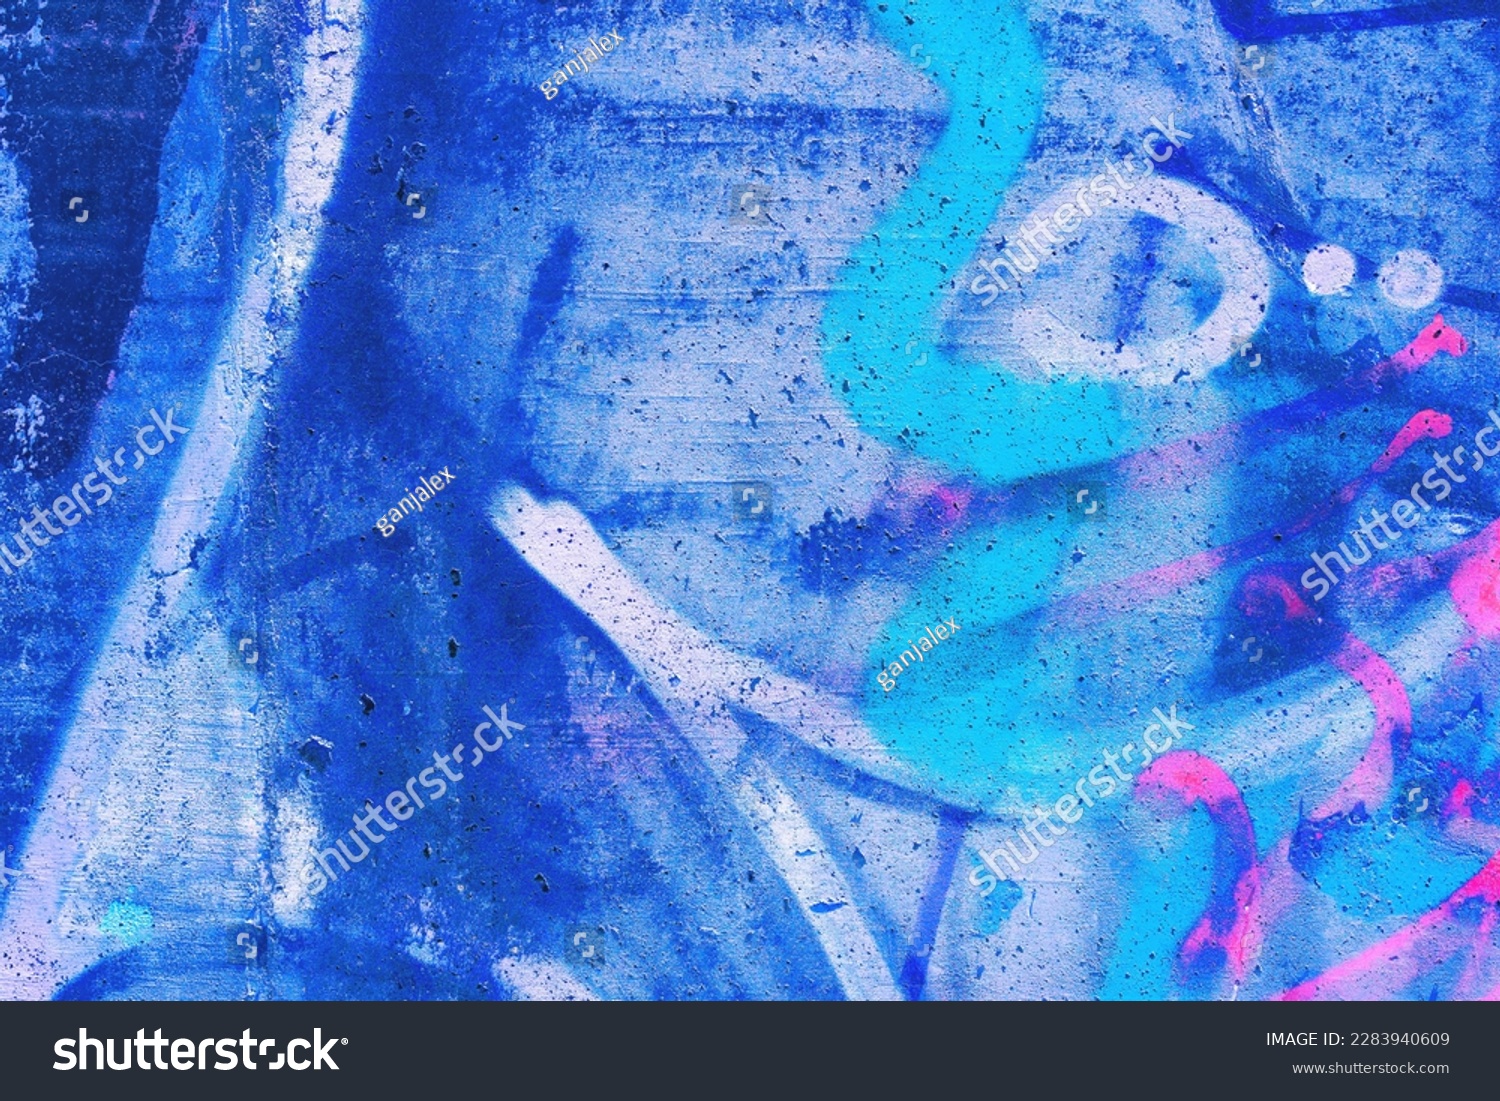 Closeup of colorful pink, purple, blue urban wall texture. Modern pattern for wallpaper design. Creative modern urban city background for advertising mockups. Grunge messy street style background #2283940609